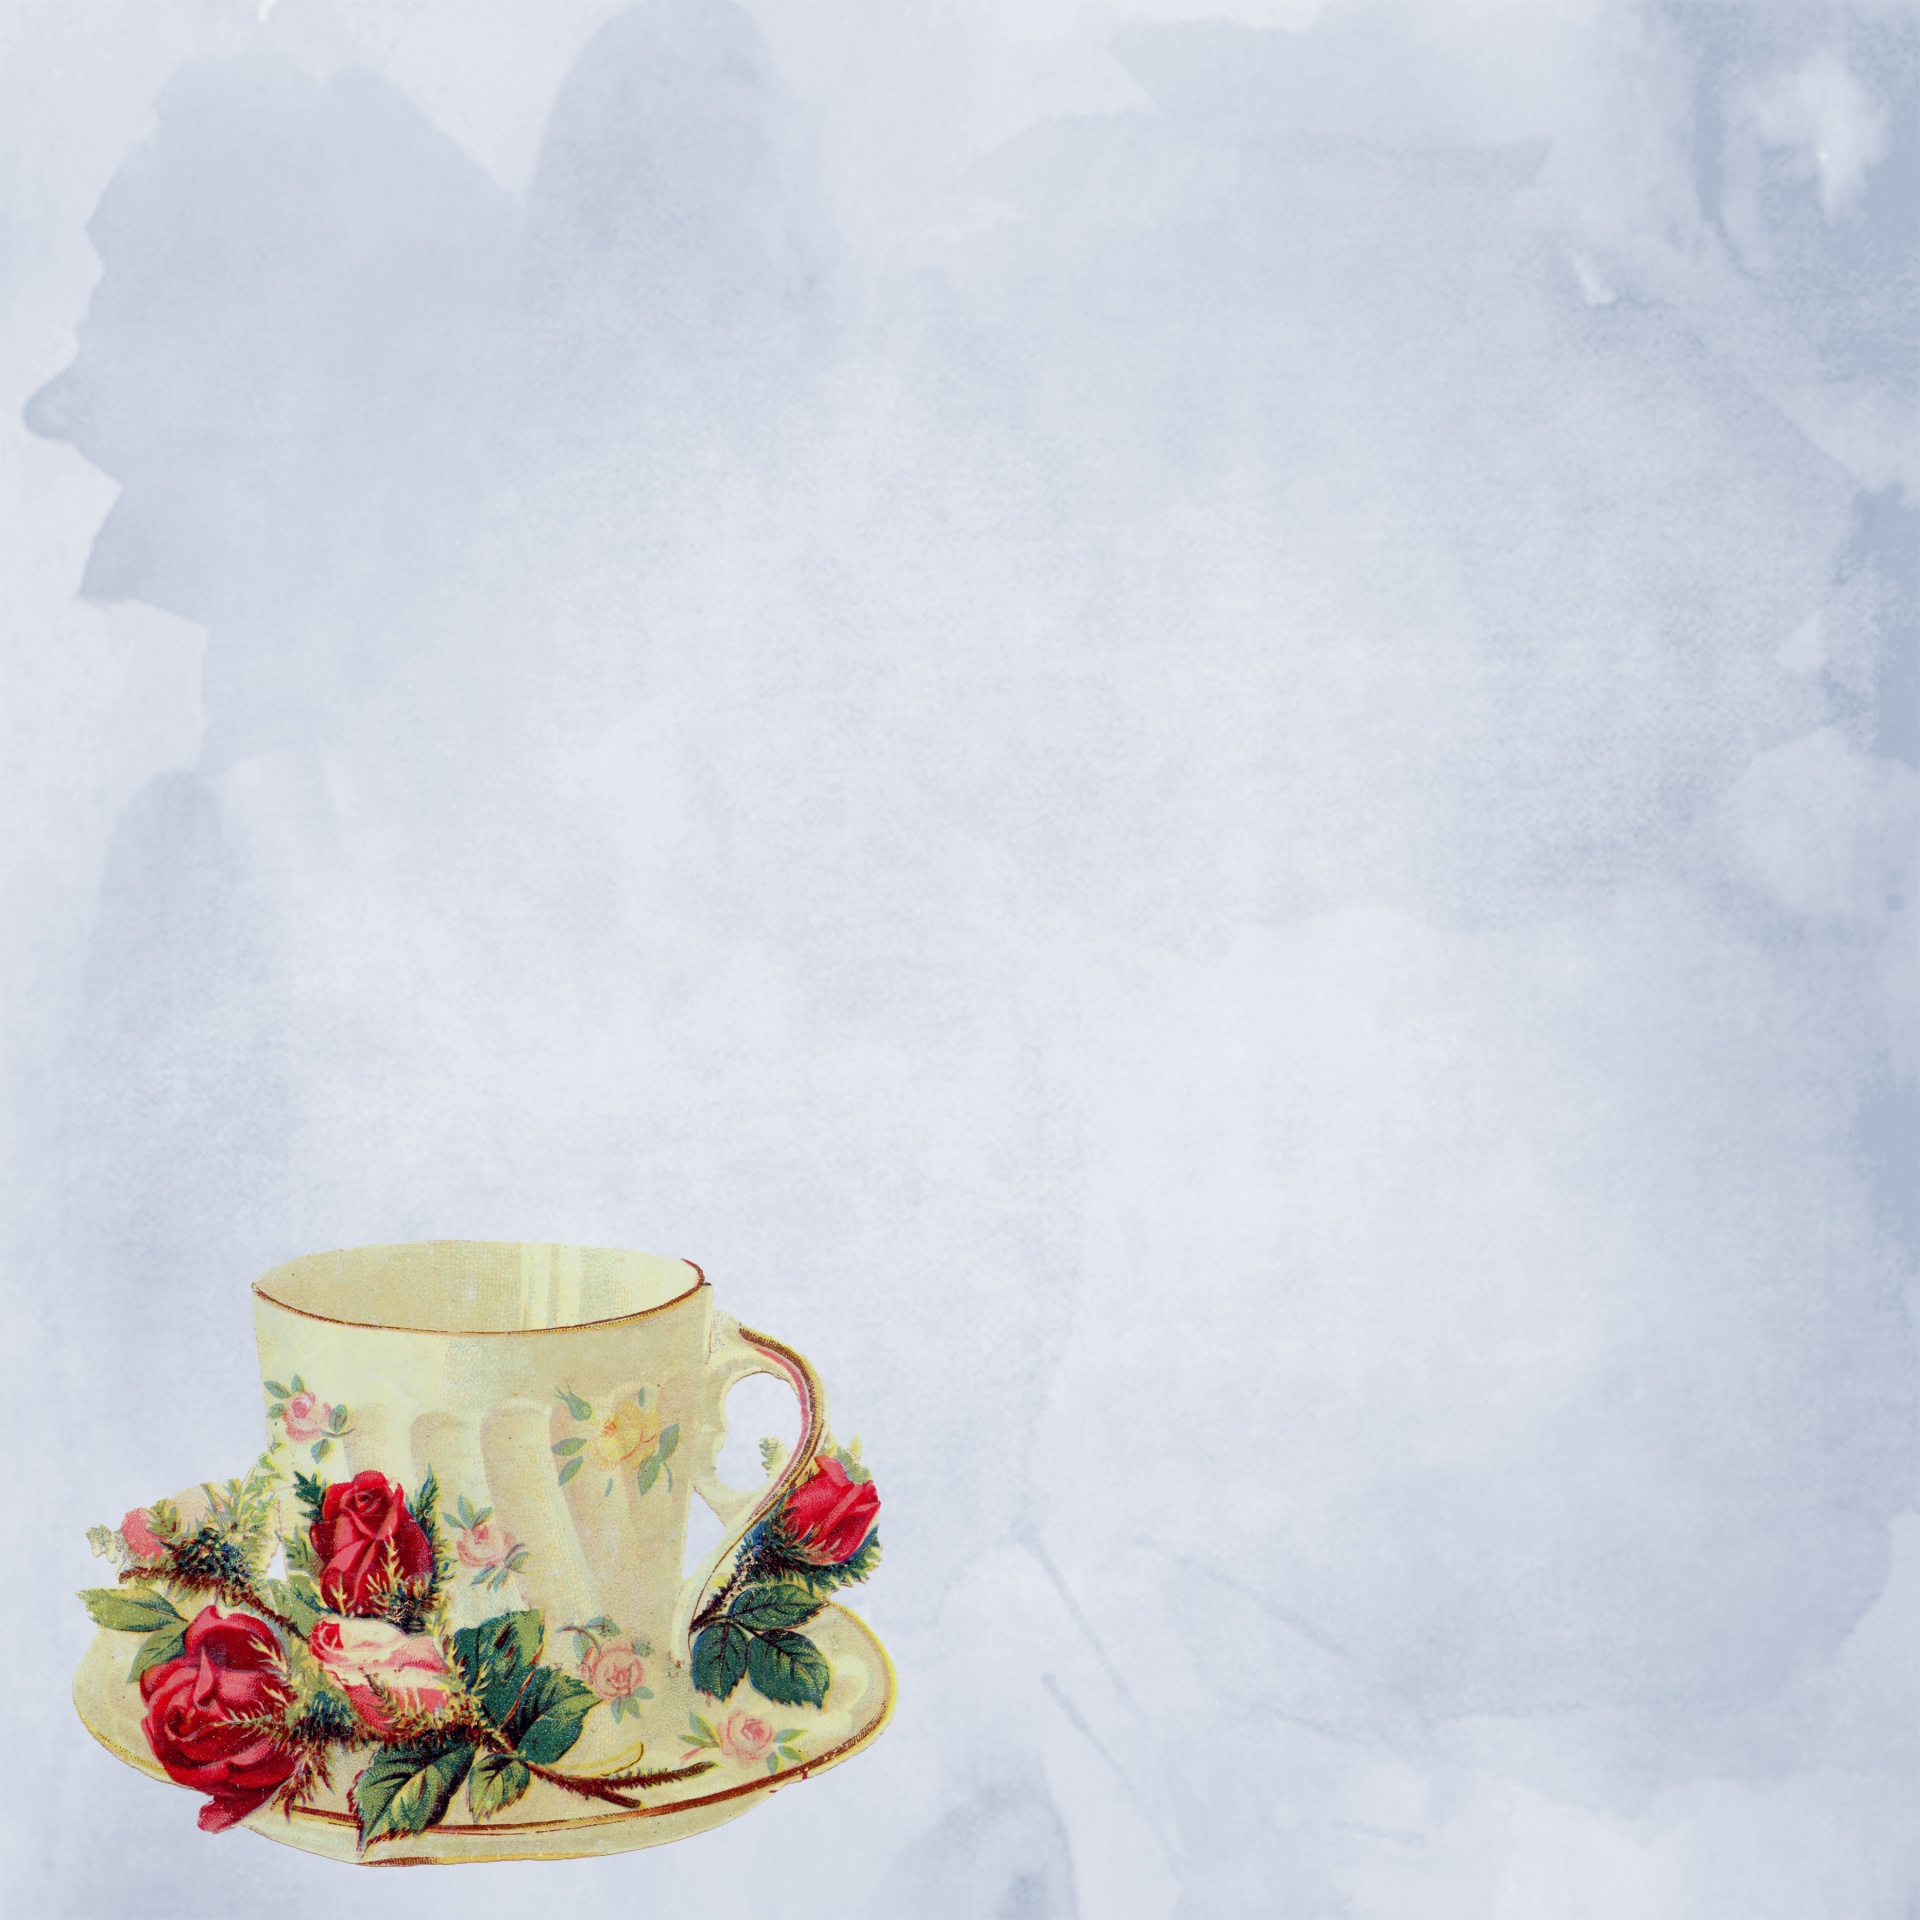 Vintage victorian teacup with roses watercolor wallpaper background